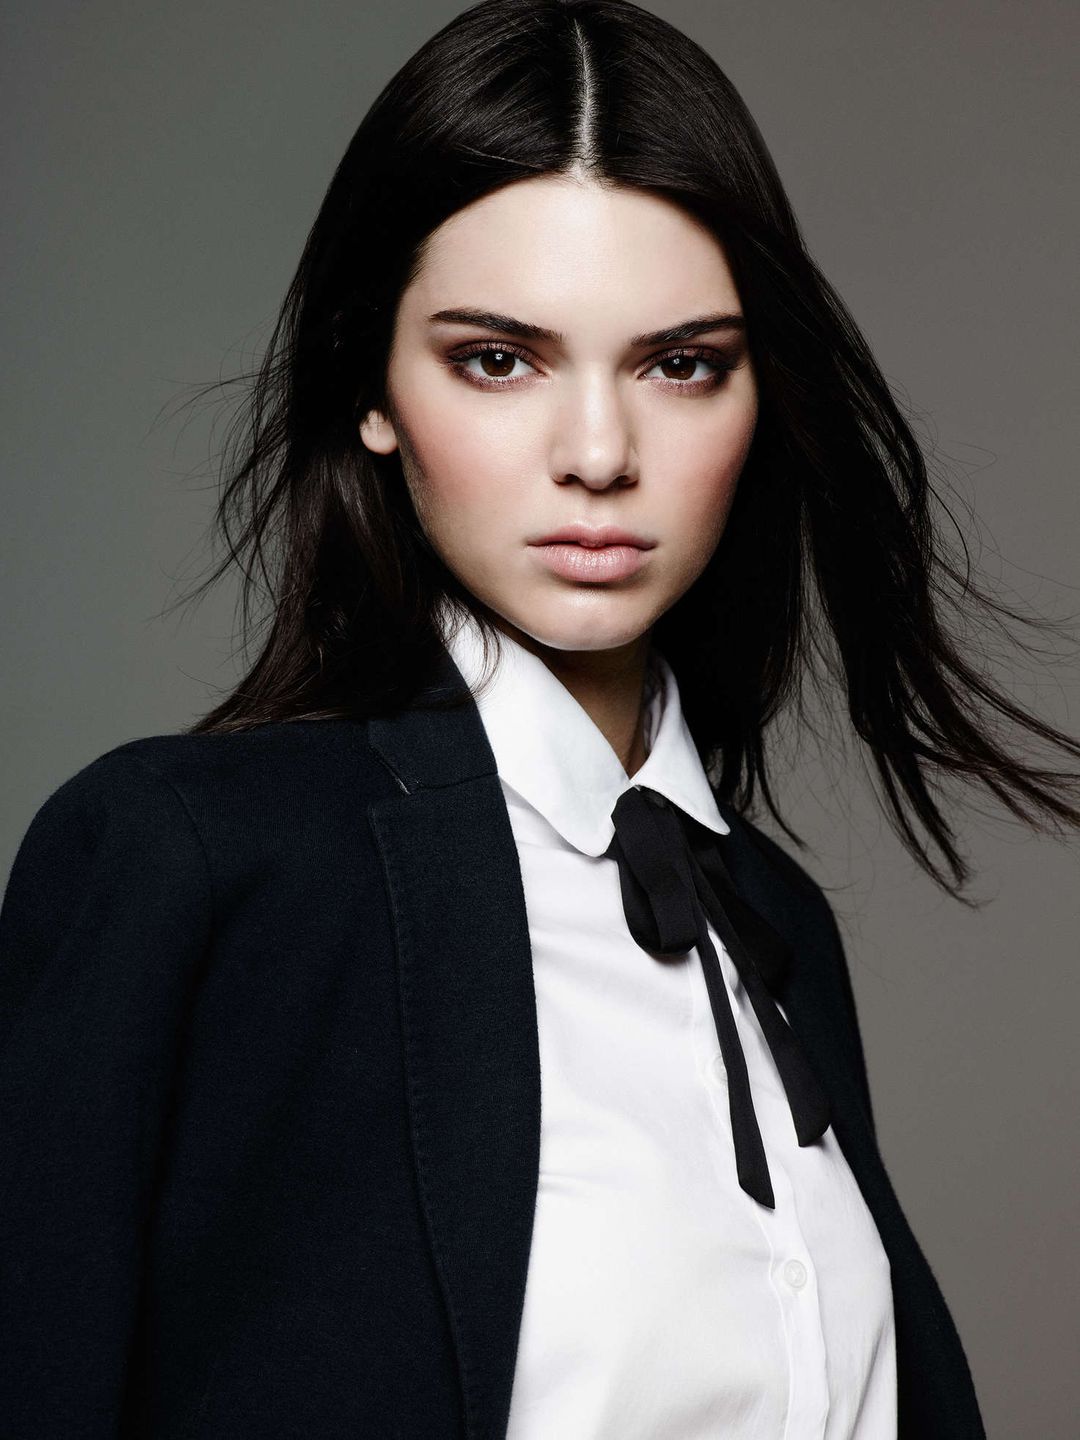 Kendall Jenner story of success